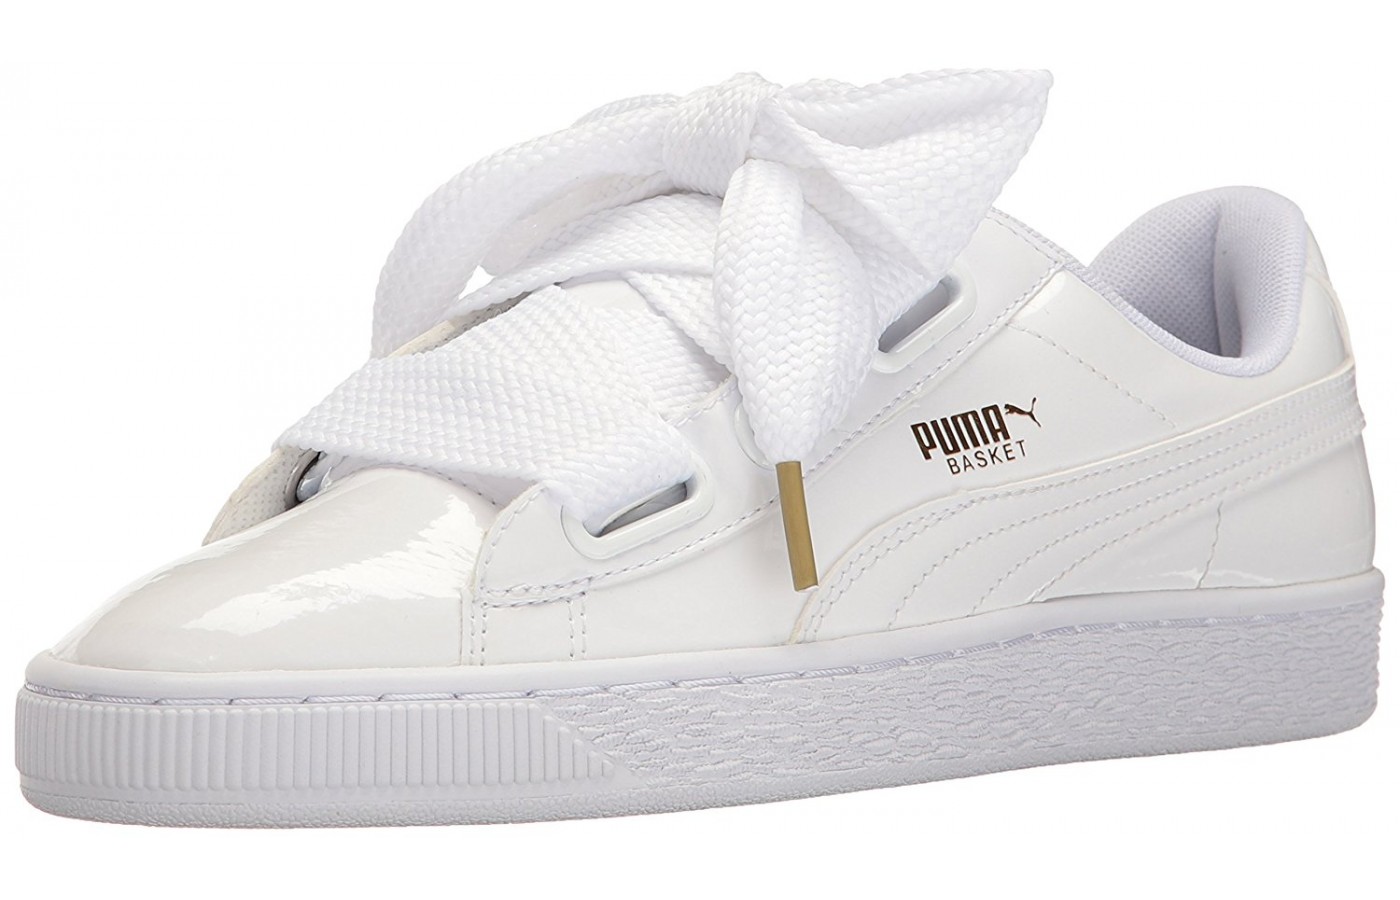 Puma Basket Heart Reviewed for Style in 